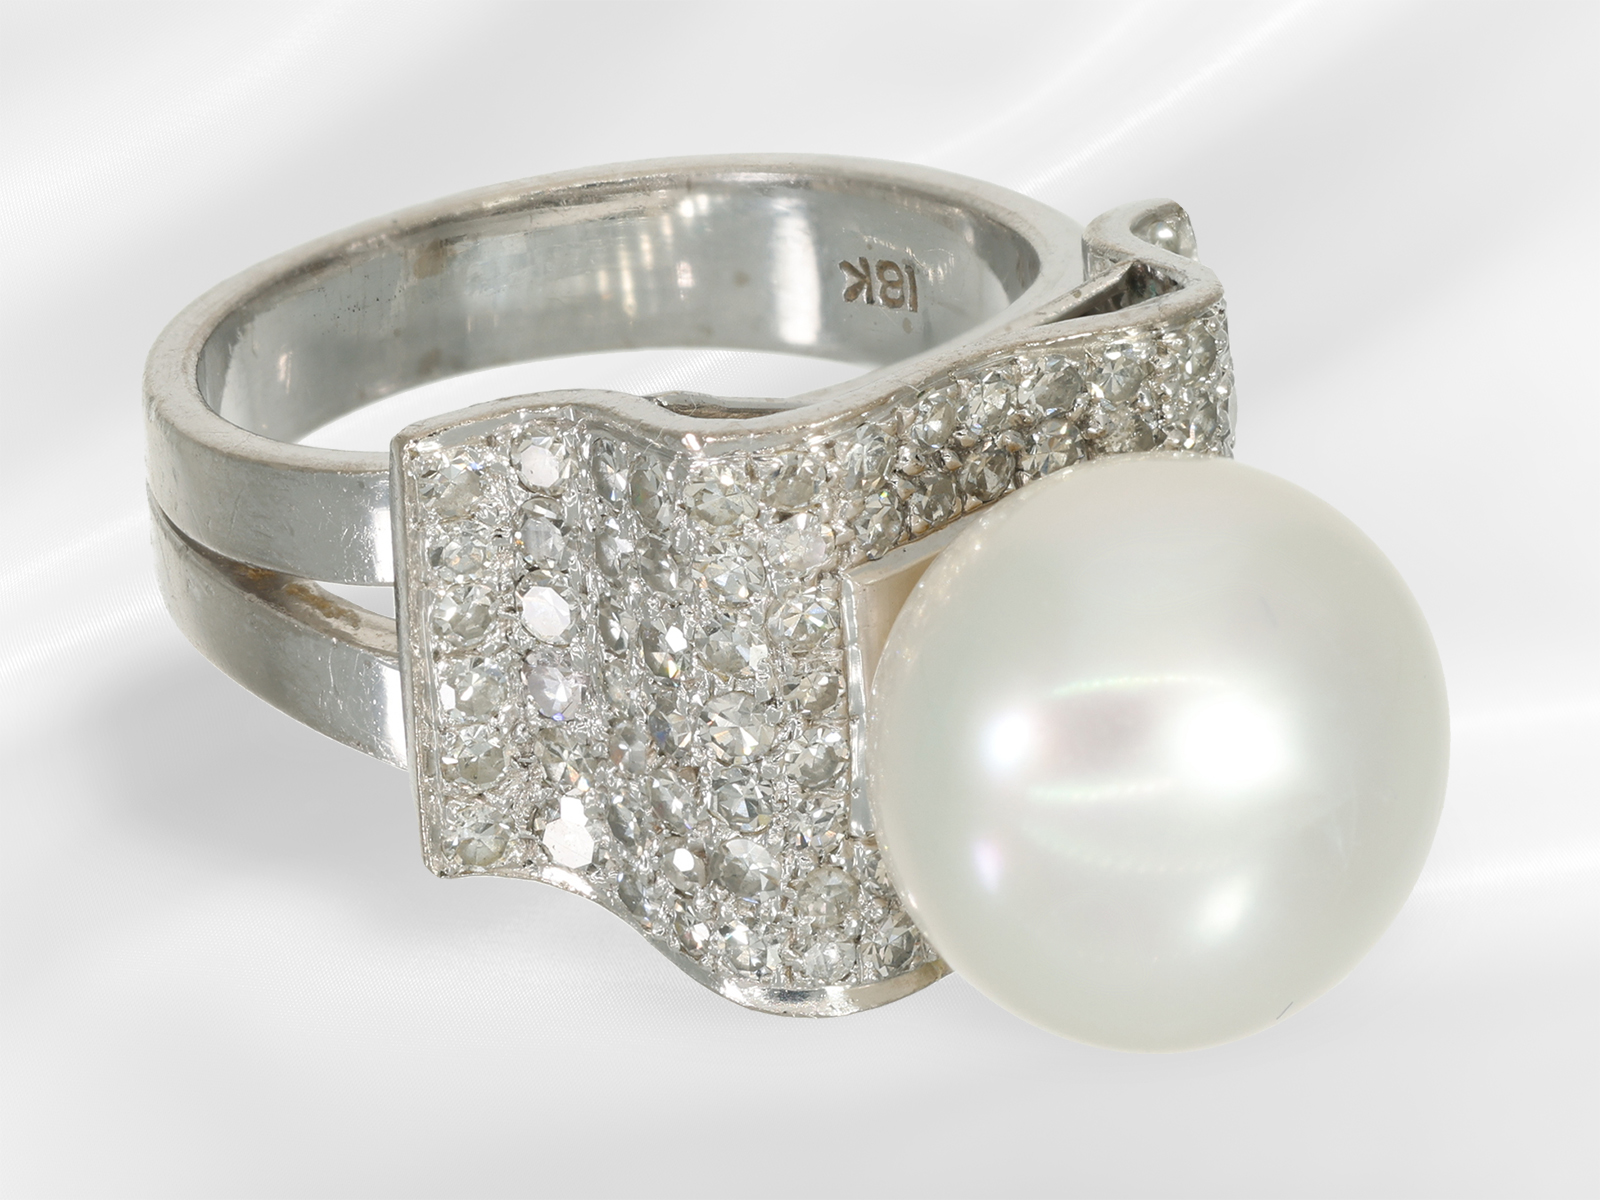 Ring: unusual and interestingly crafted 18k white gold ring with South Sea pearl and diamonds - Image 6 of 6